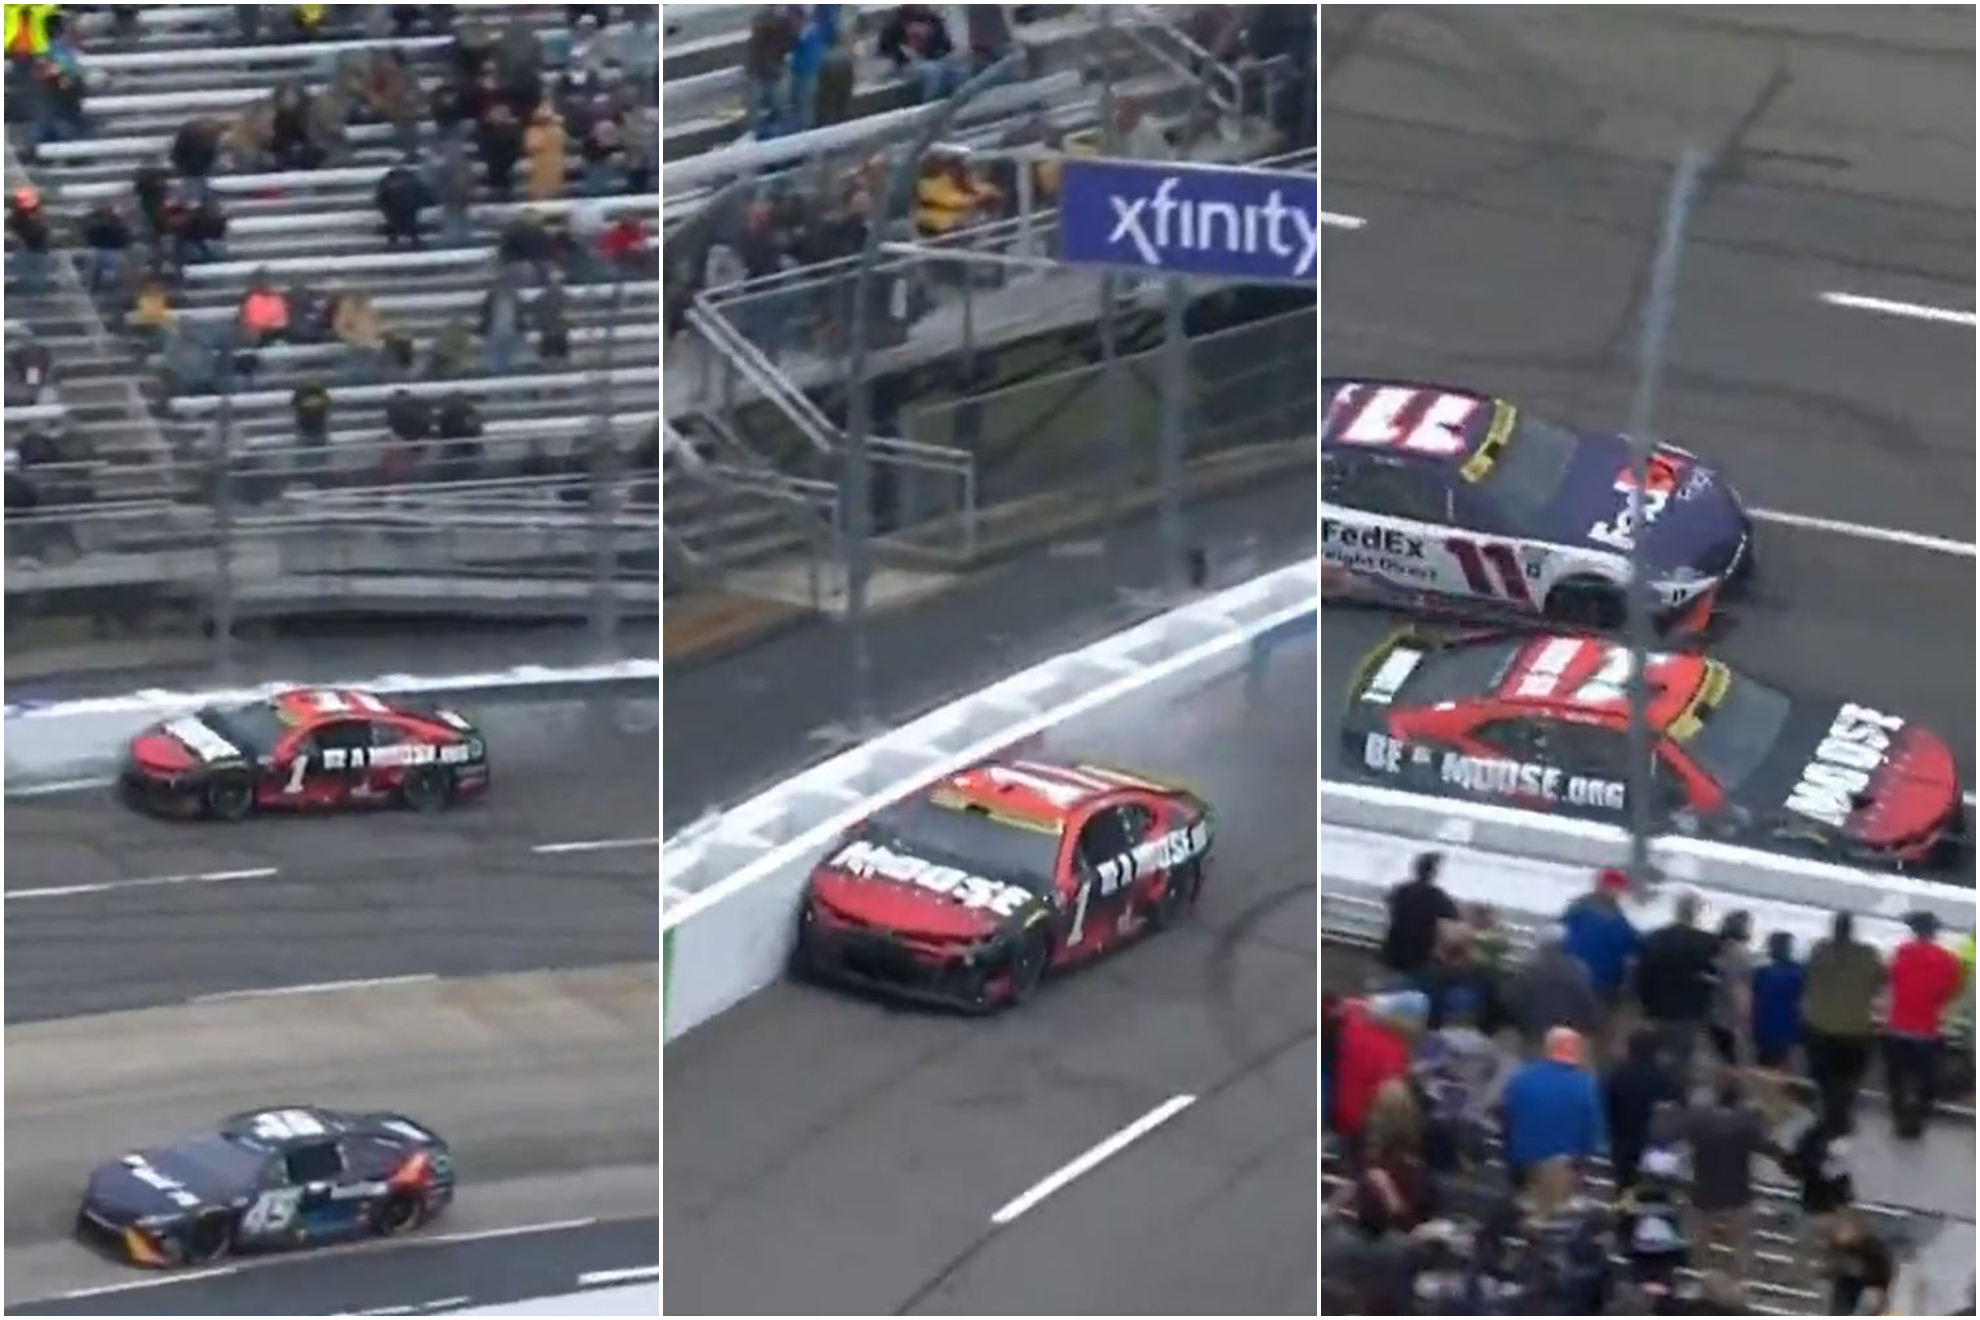 The craziest overtaking you will ever see happened in NASCAR